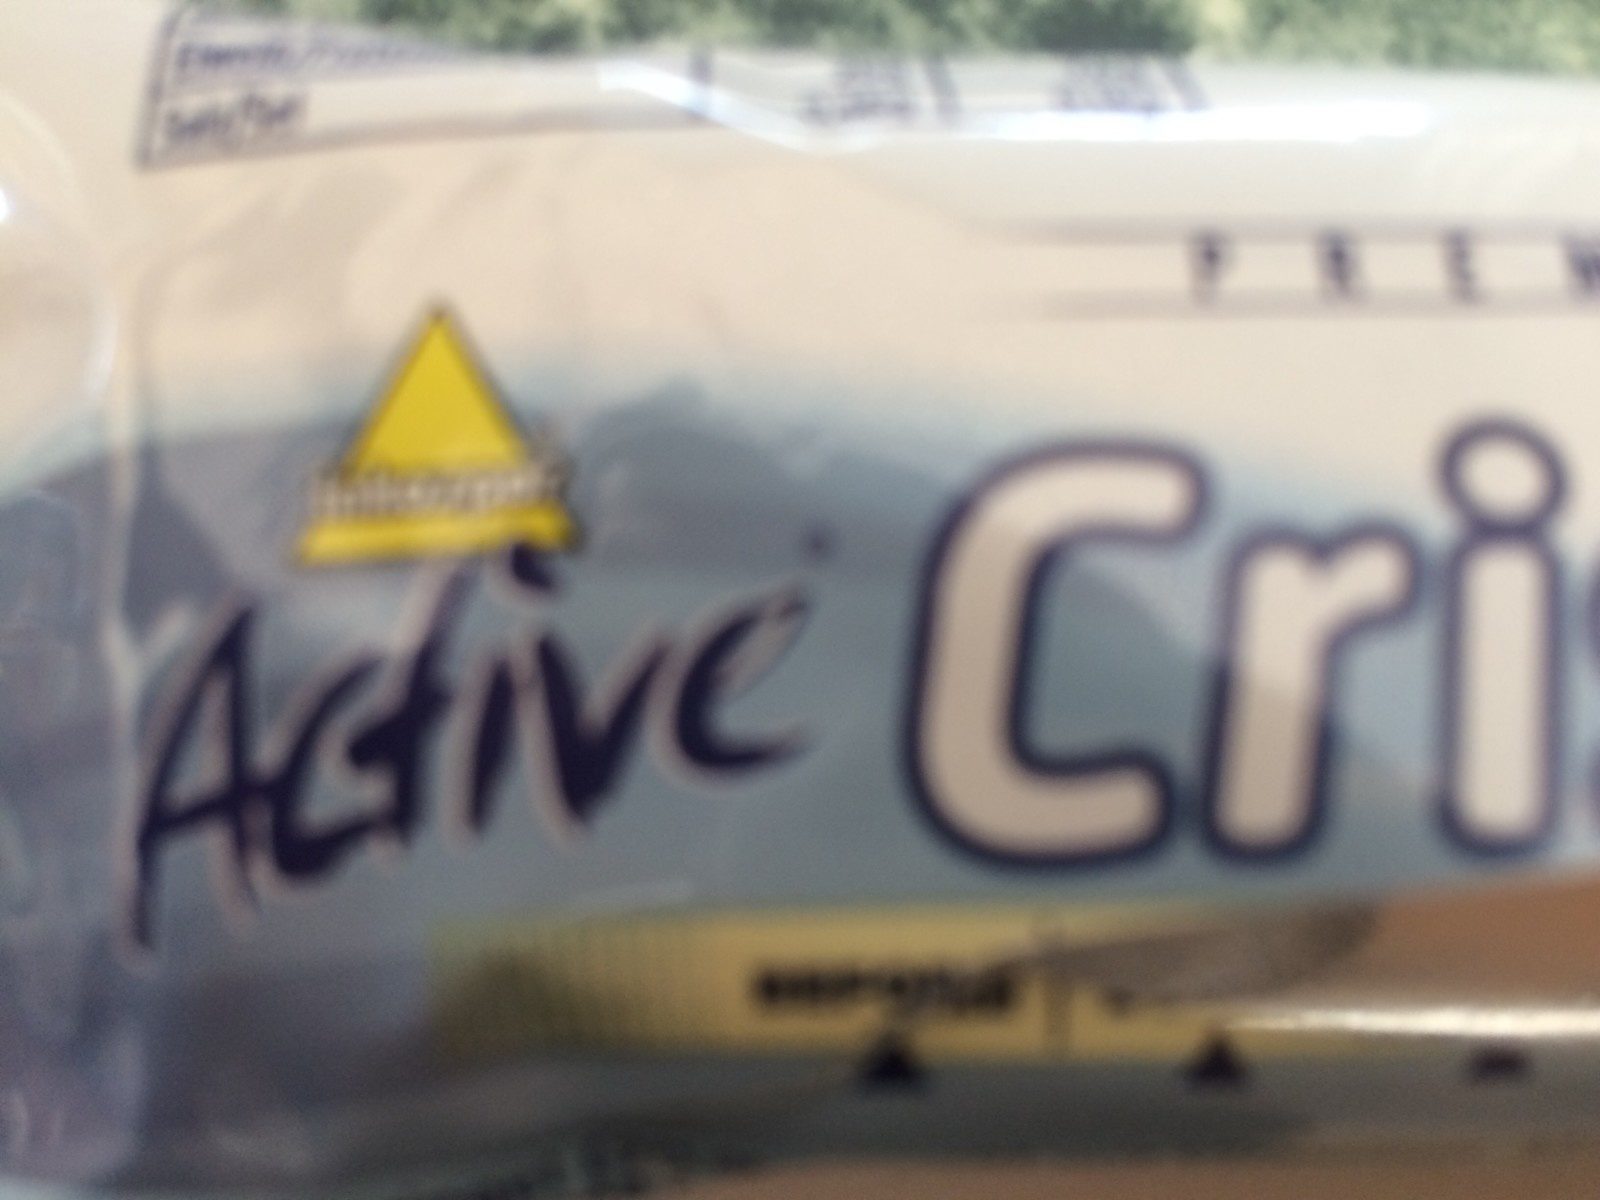 Active Crispy , Vanille White Chocolate - Product - fr